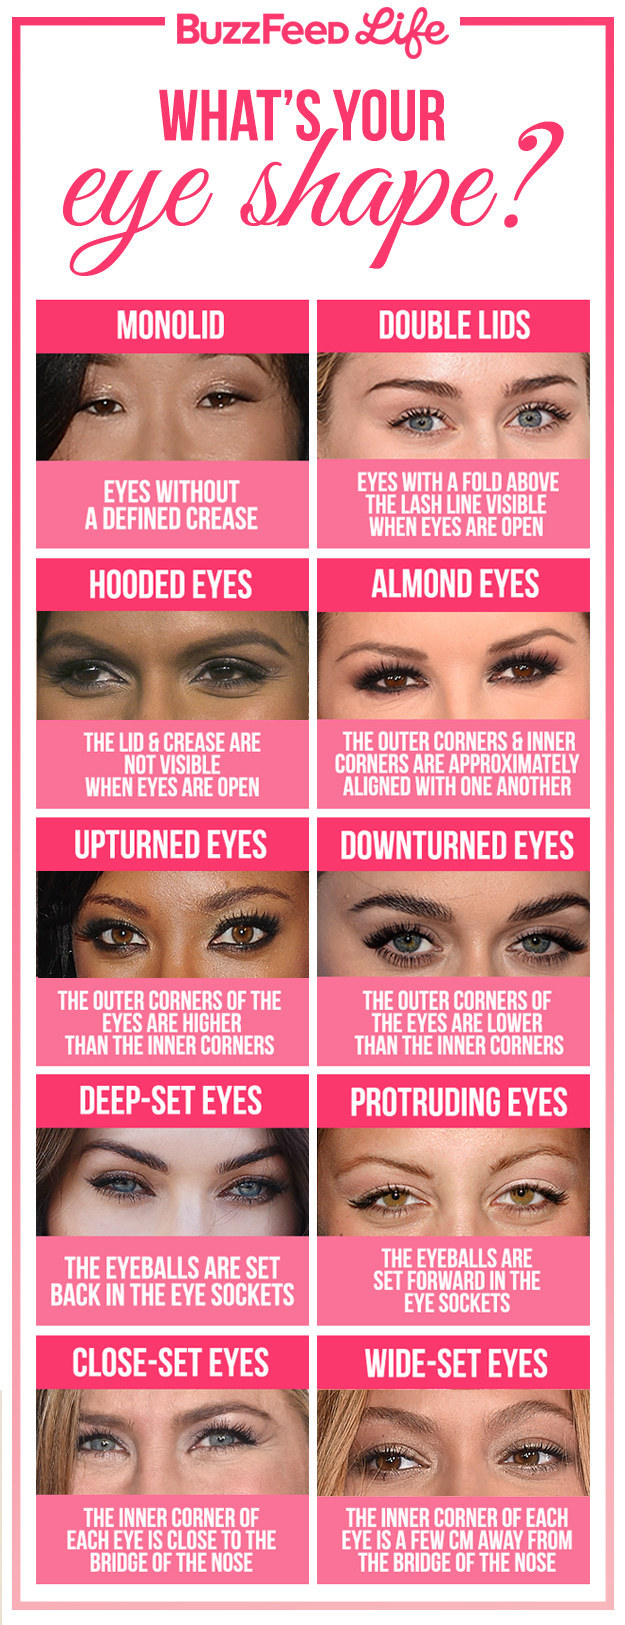 Figure out which eye shape you have, so you can learn more about different shading techniques that work best for you.